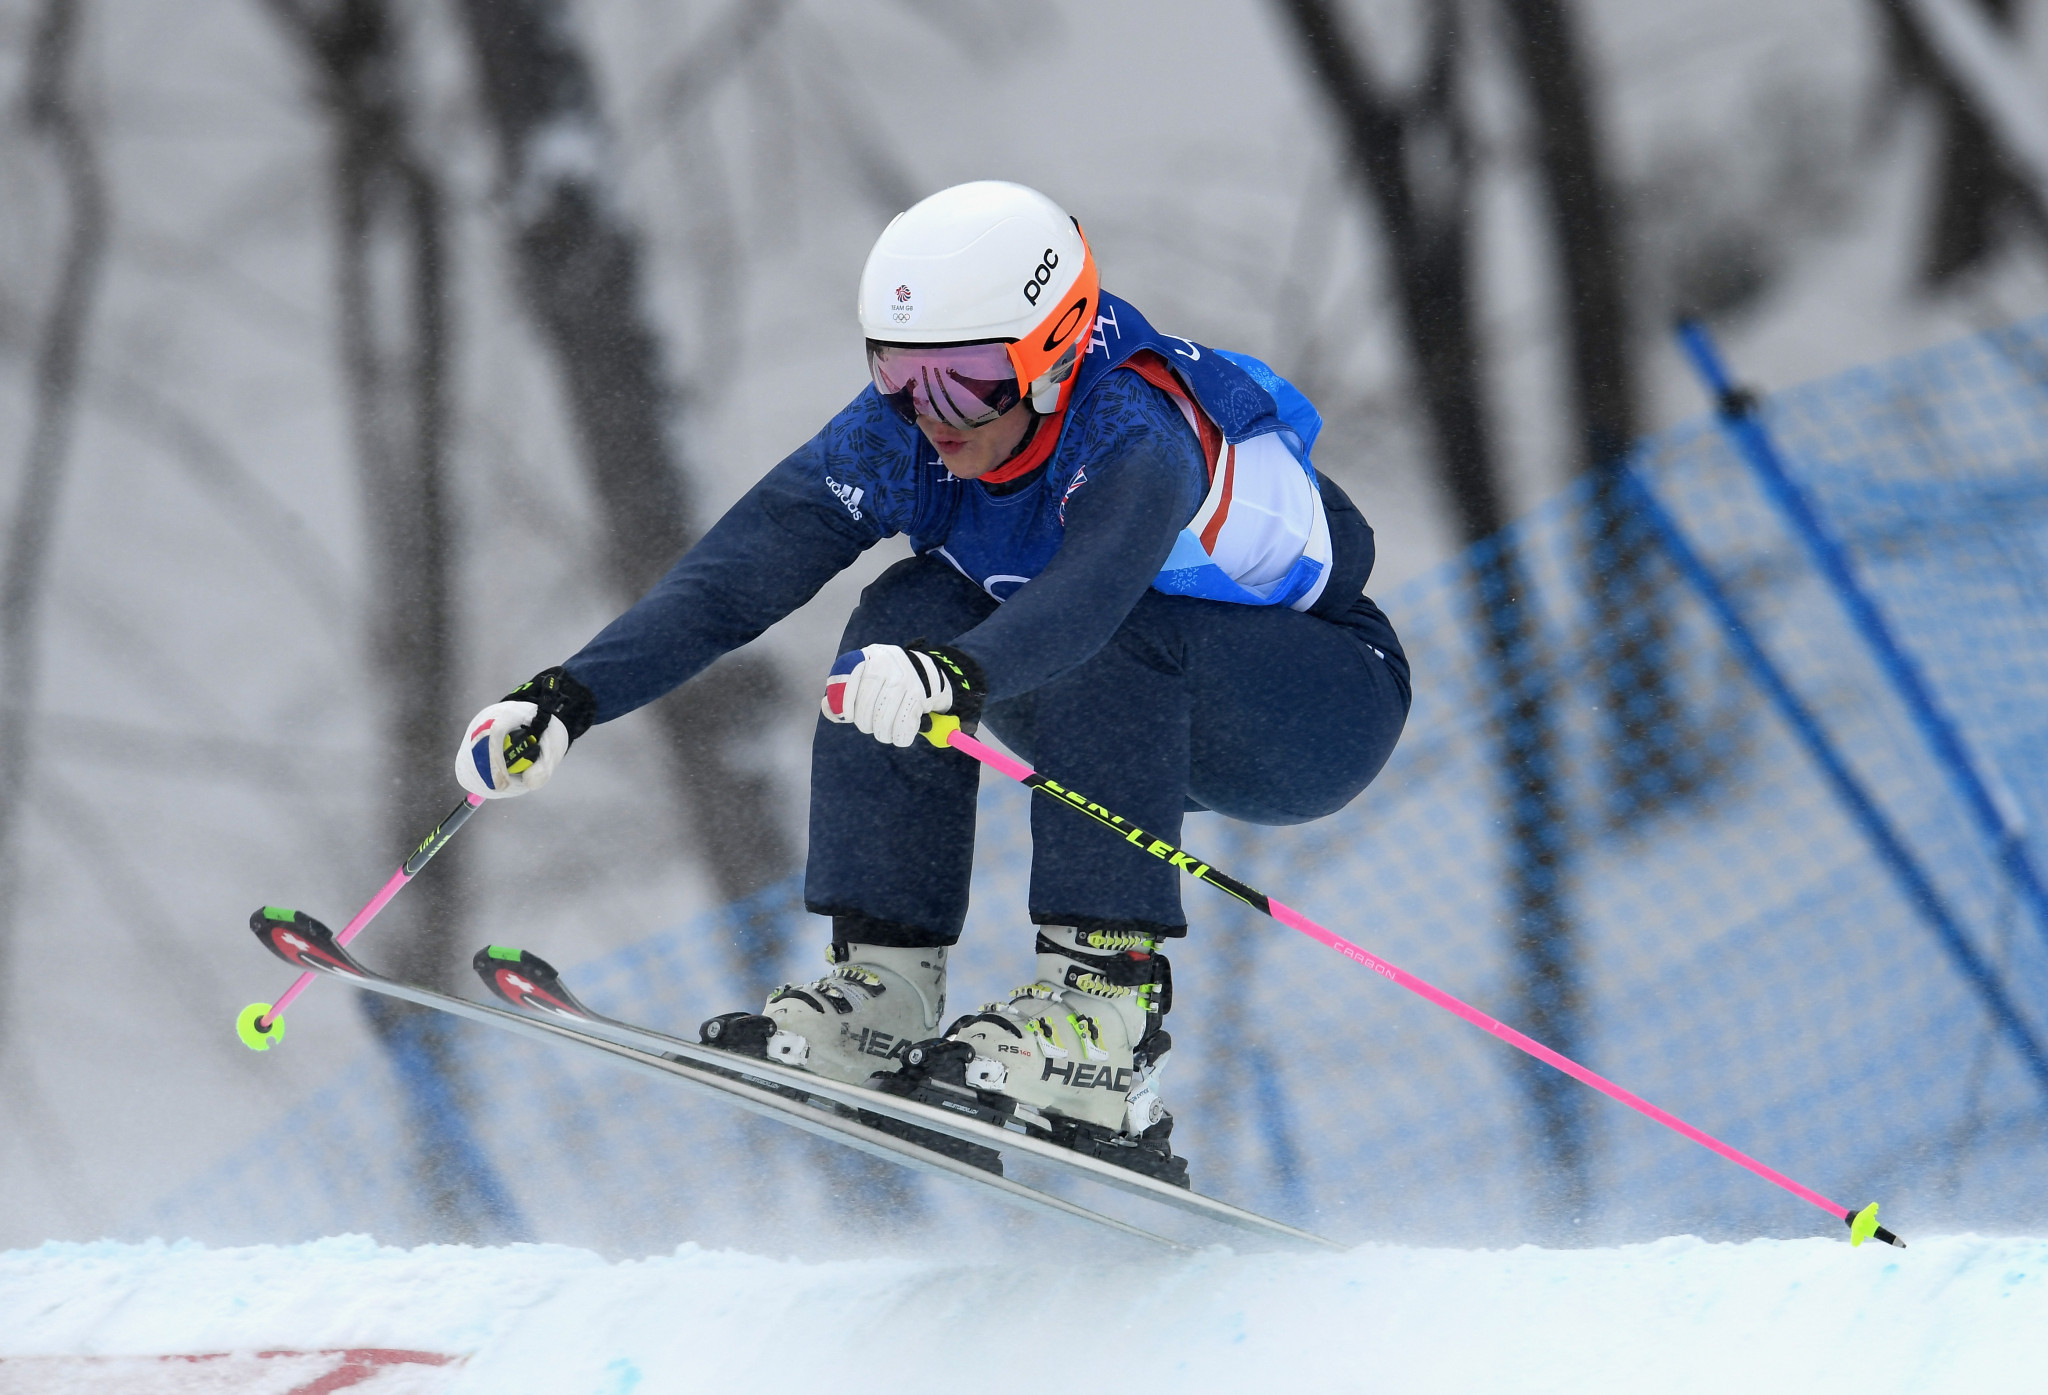 Britain's Emily Sarsfield will compete in ski cross during the World Cup season ©Getty Images